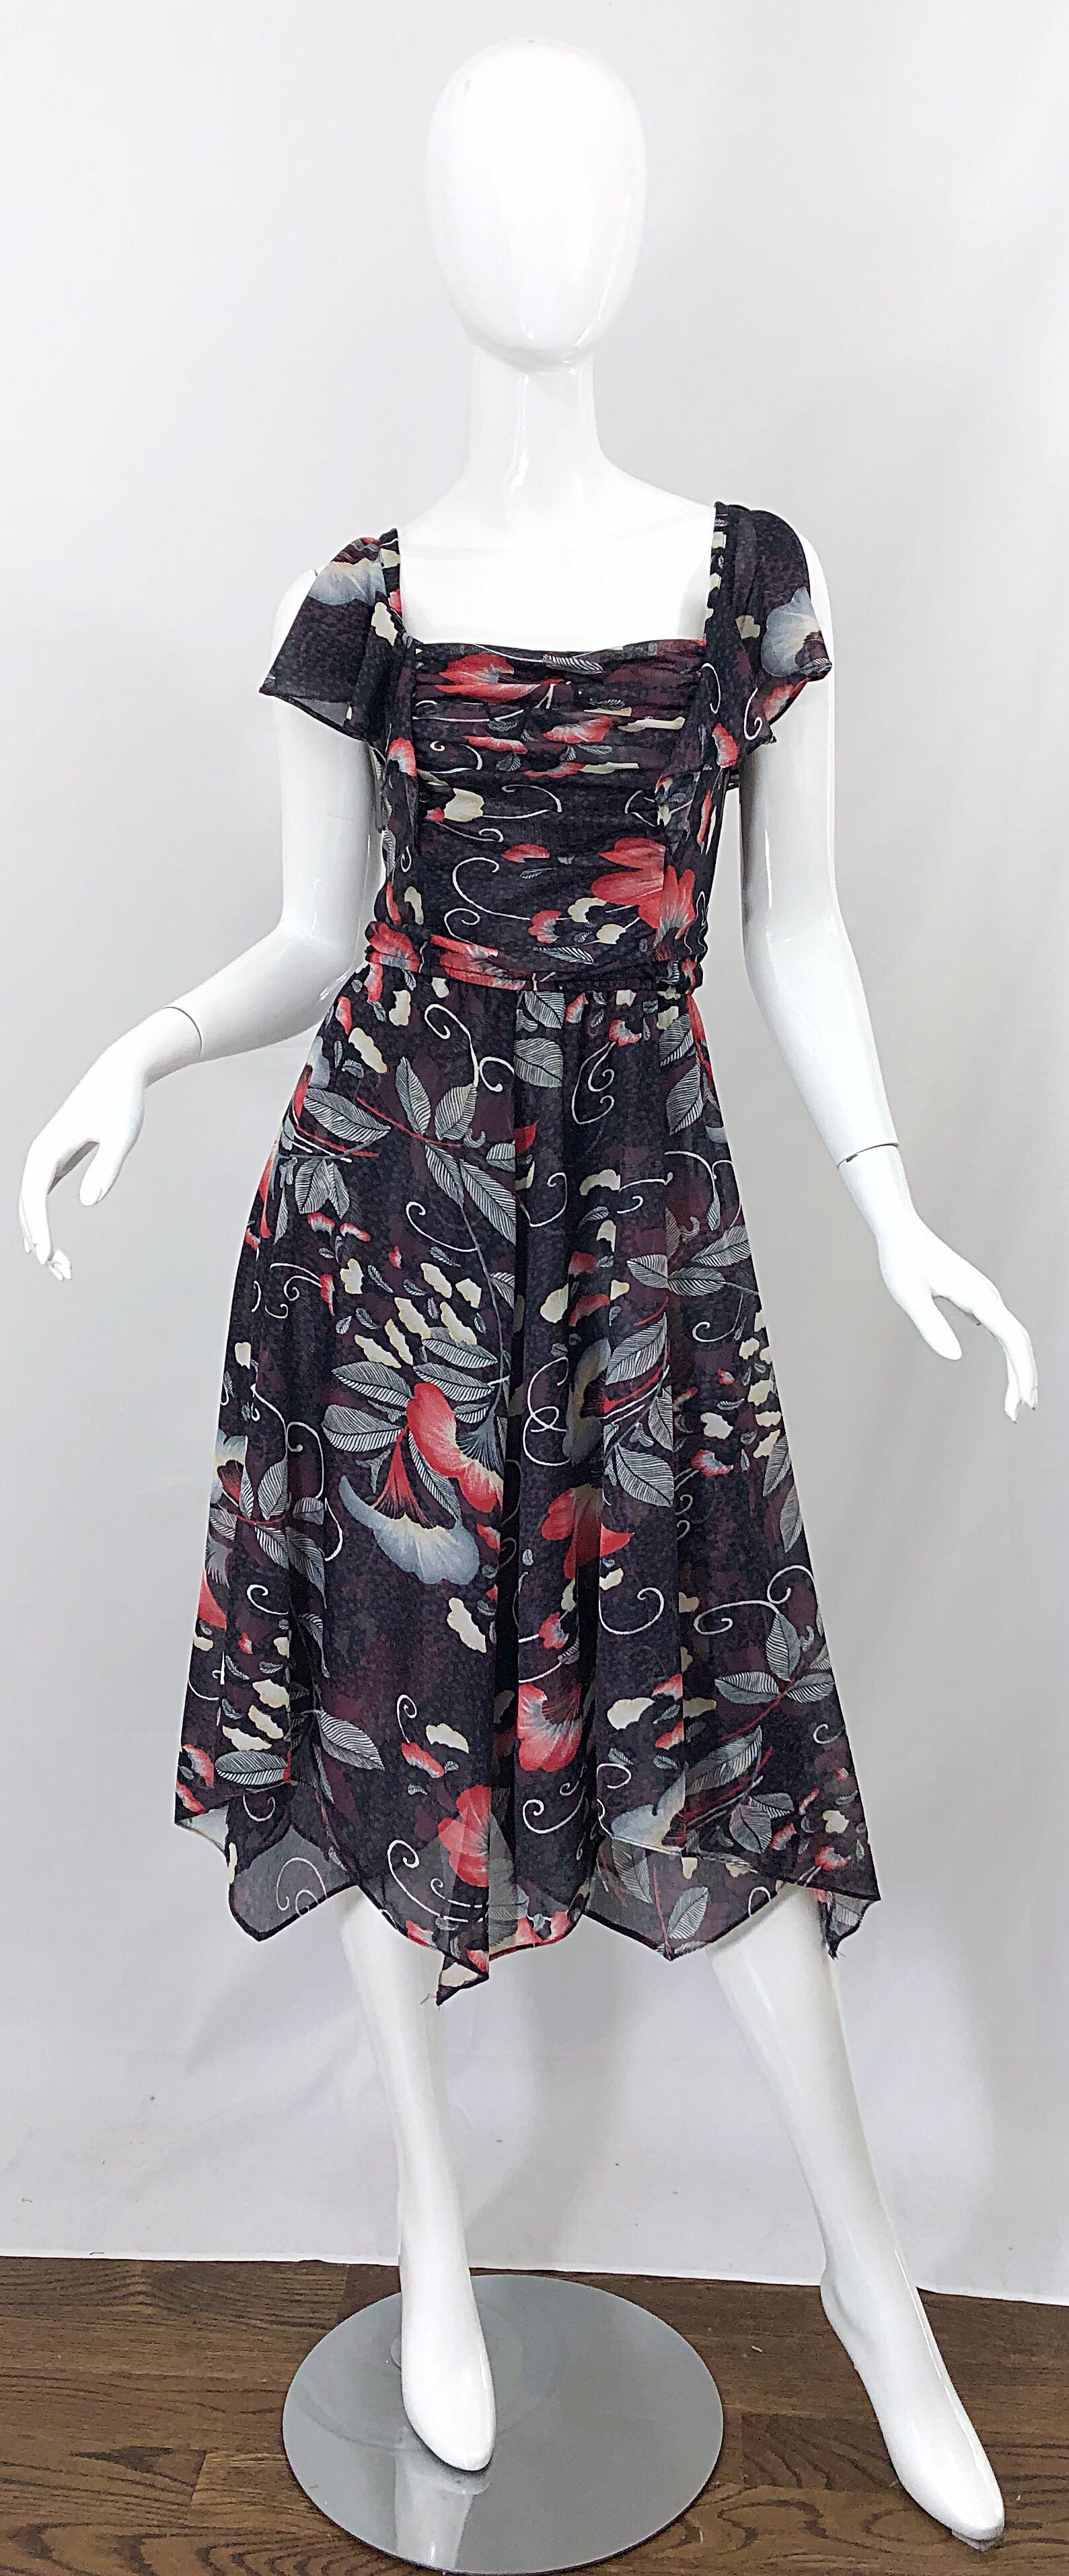 Amazing 190s RARE HEPBURN handkerchief hem cold shoulder Asian themed black, red and white dress! Features a flattering ruched bodice with a forgiving flattering skirt that looks great on the dance floor. Cold shoulders reveal just the right amount